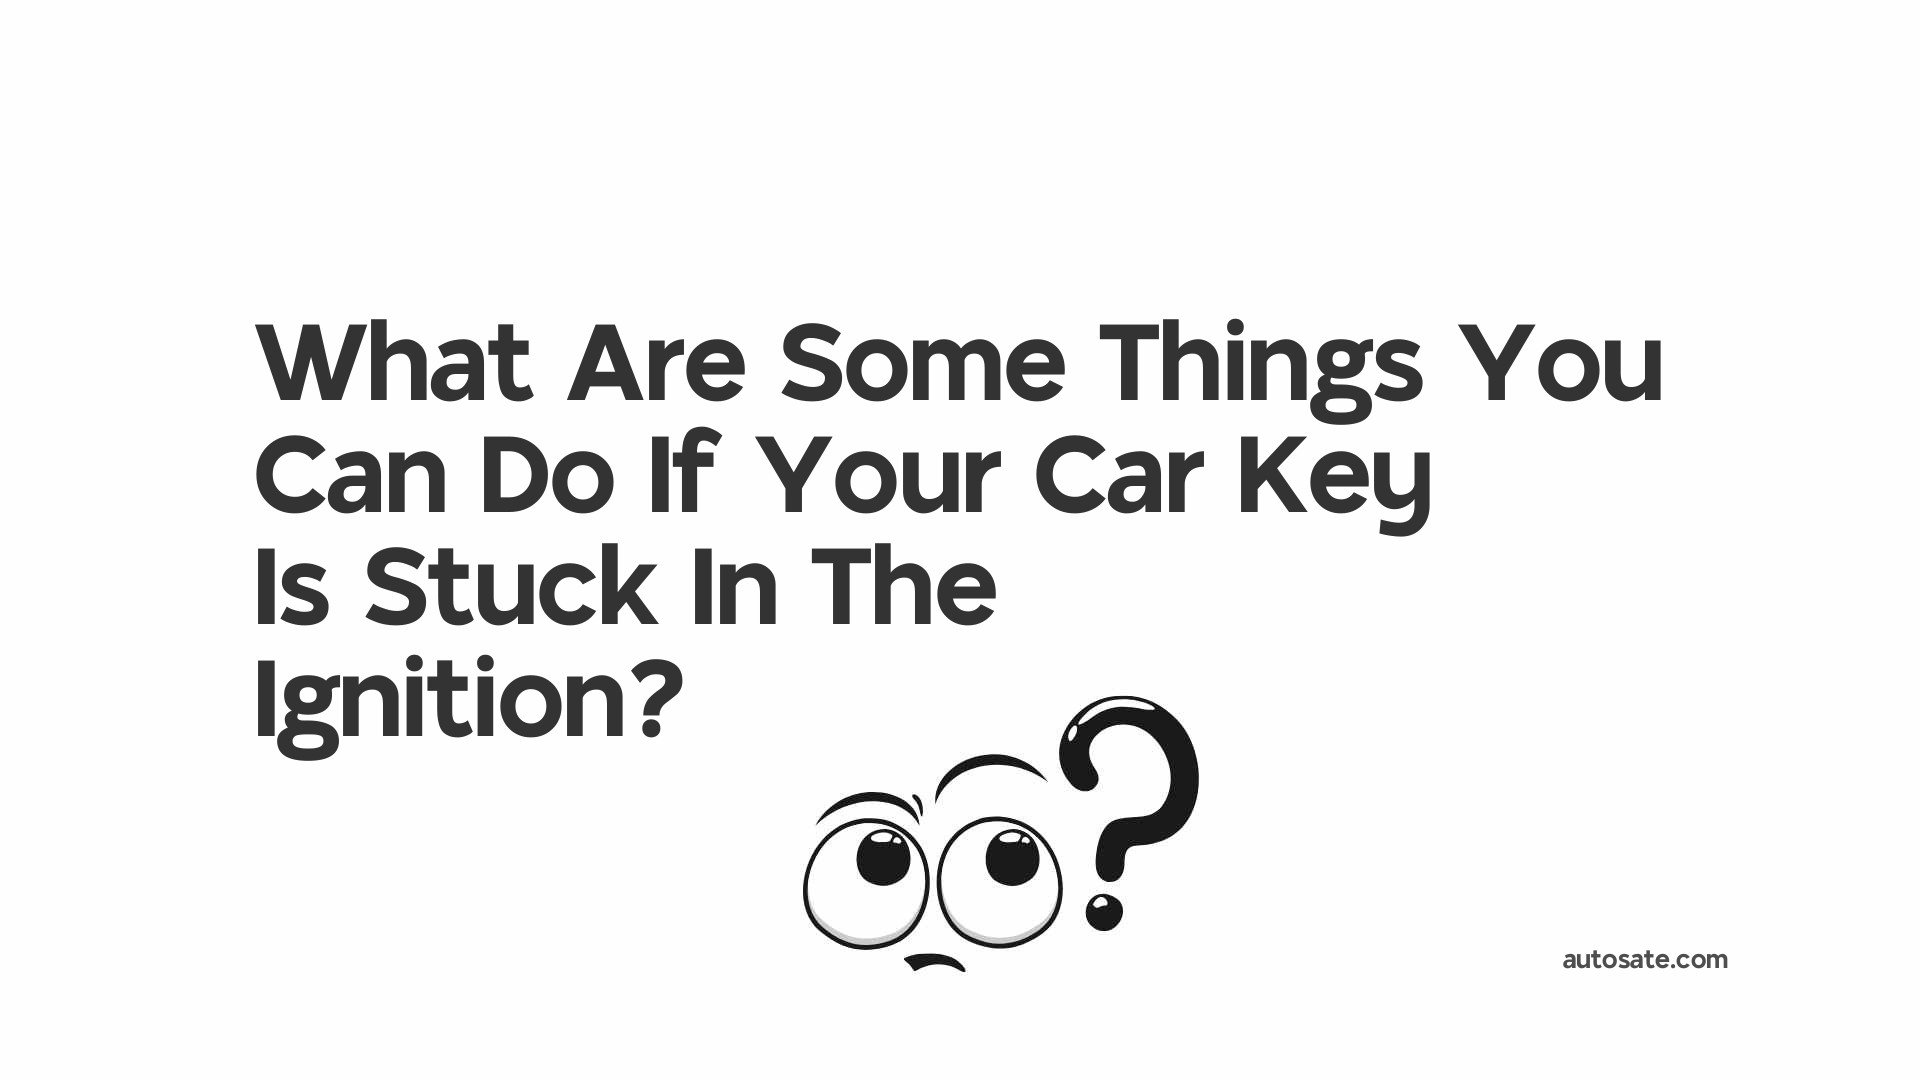 What Are Some Things You Can Do If Your Car Key Is Stuck In The Ignition?